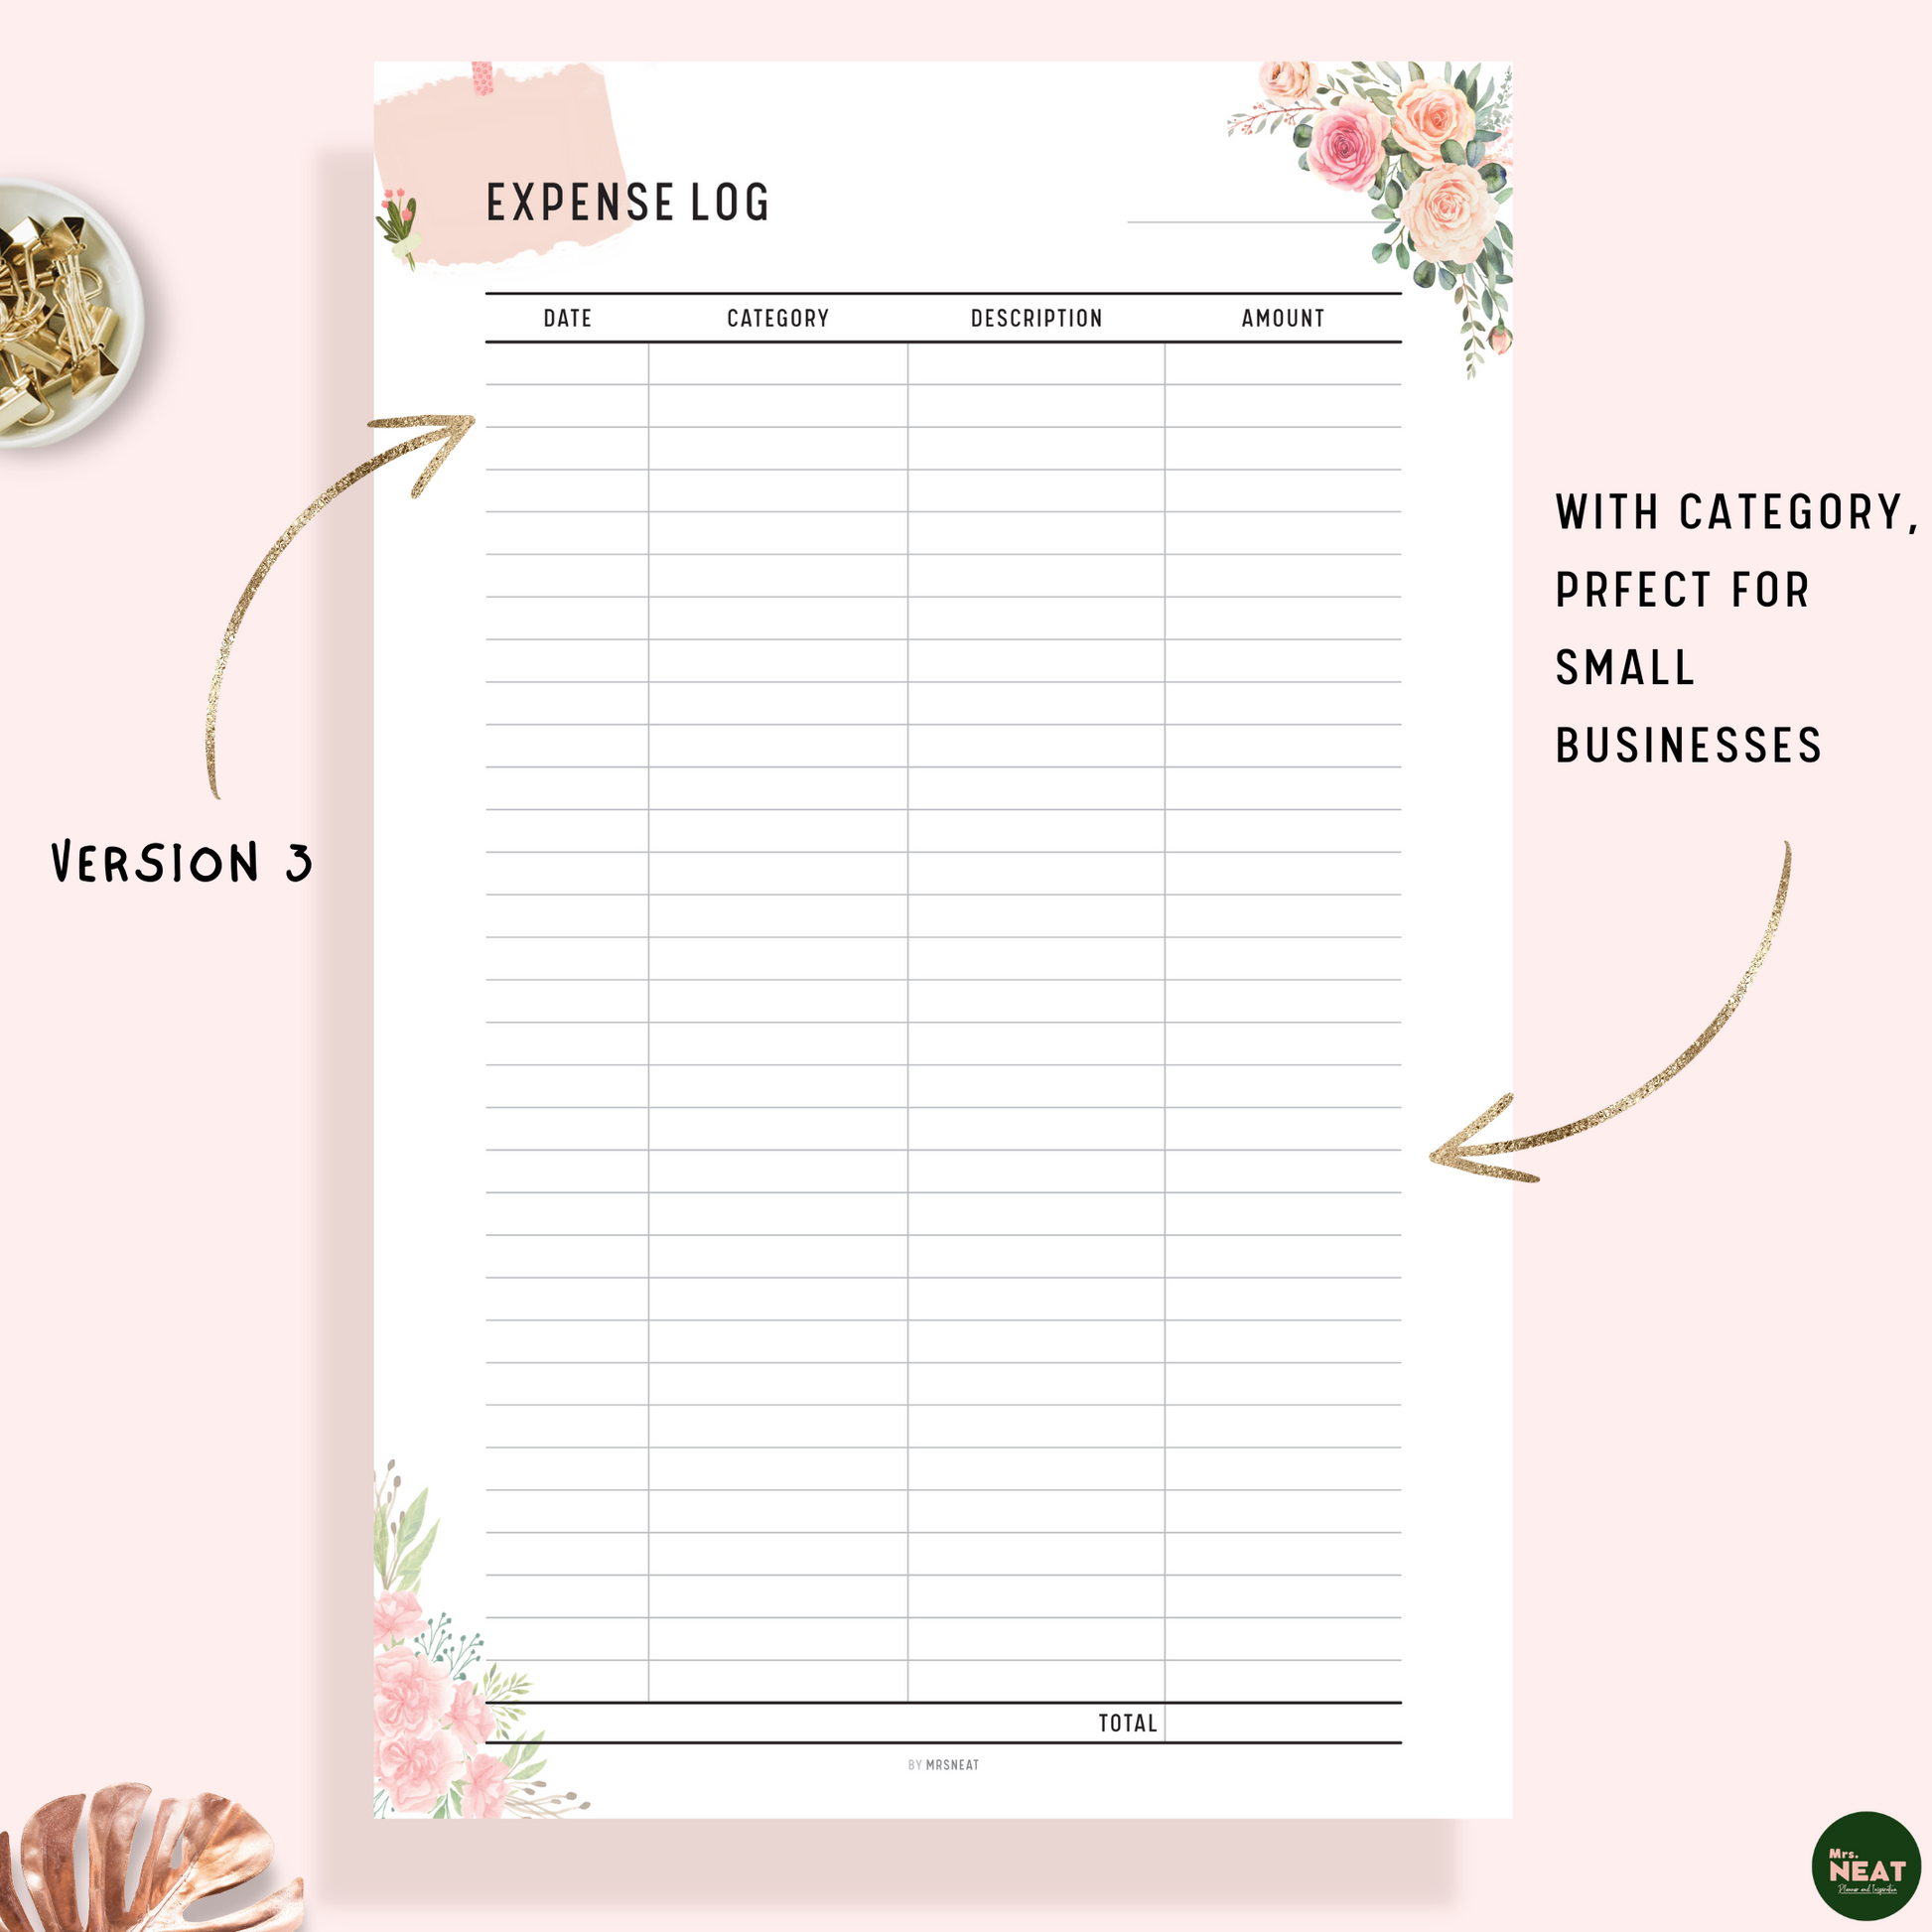 Floral Expense Log Tracker Printable Planner with room for category, date, description and amount